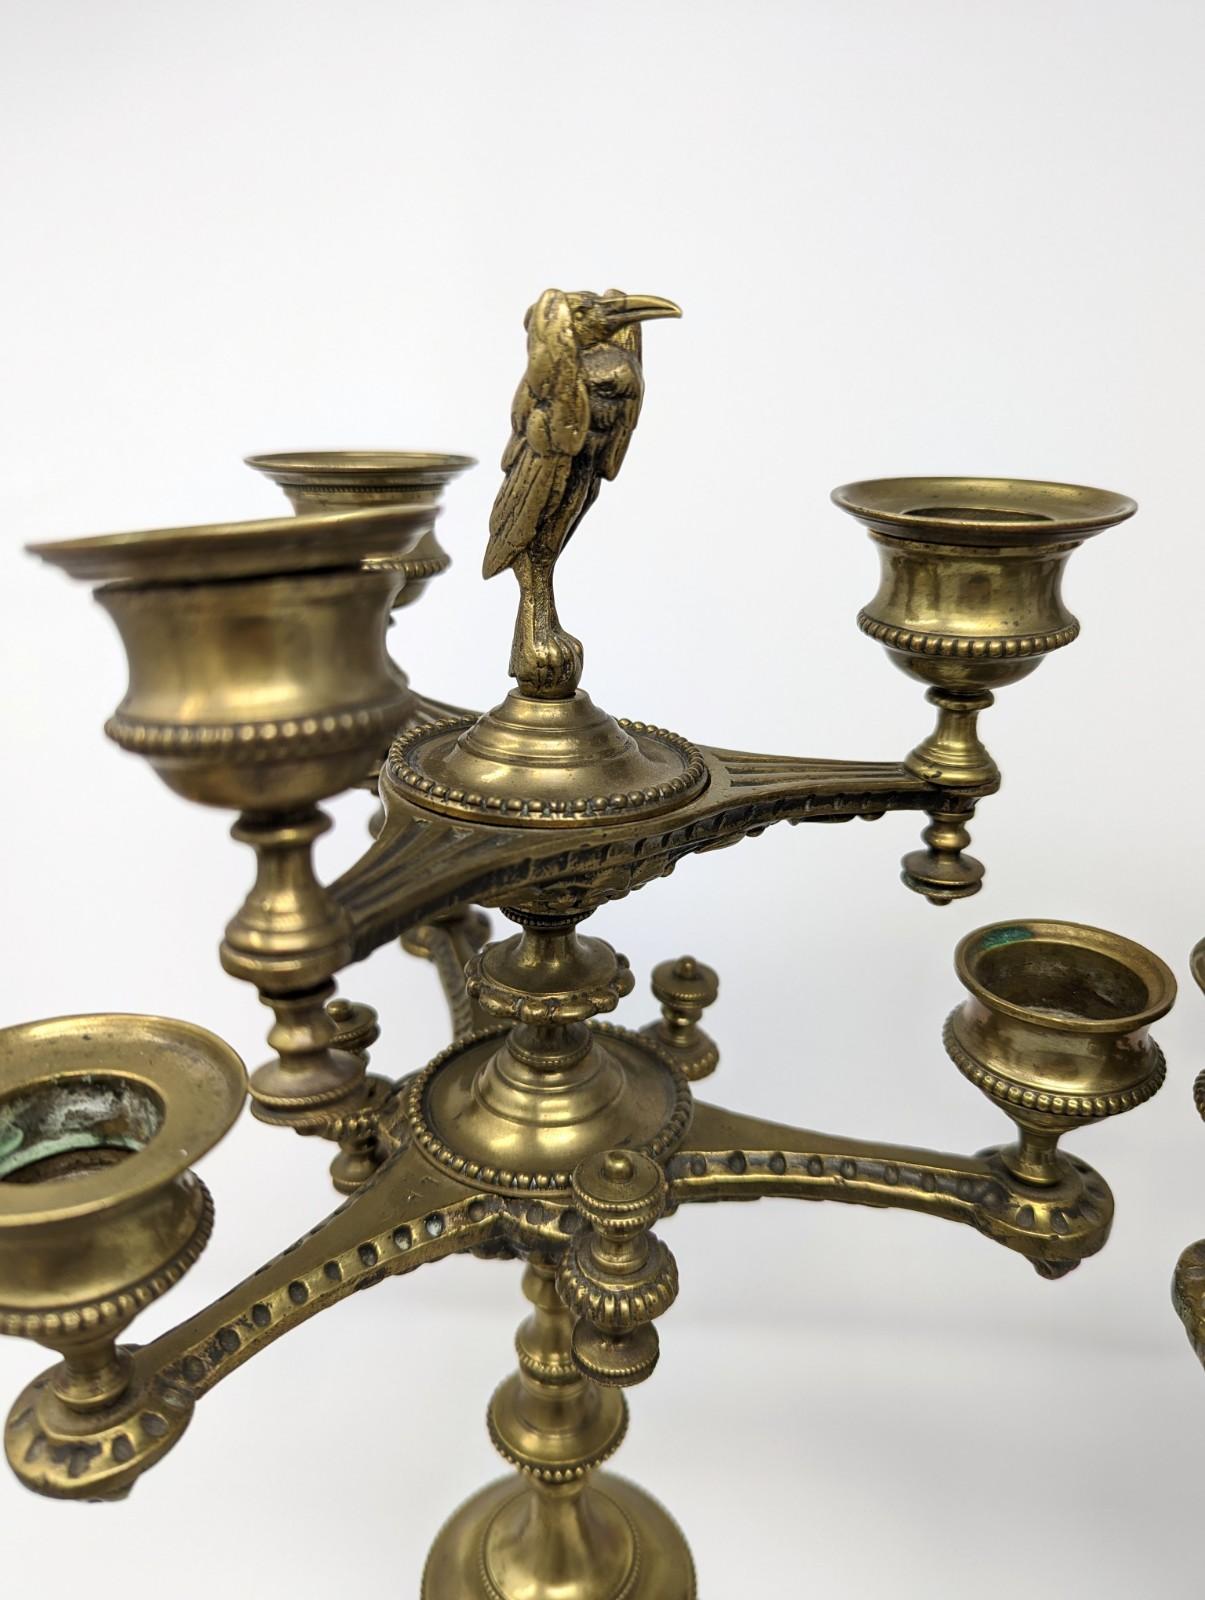 Pair of Antique Candelabras, 19th Century European Brass Candlesticks Footed For Sale 3